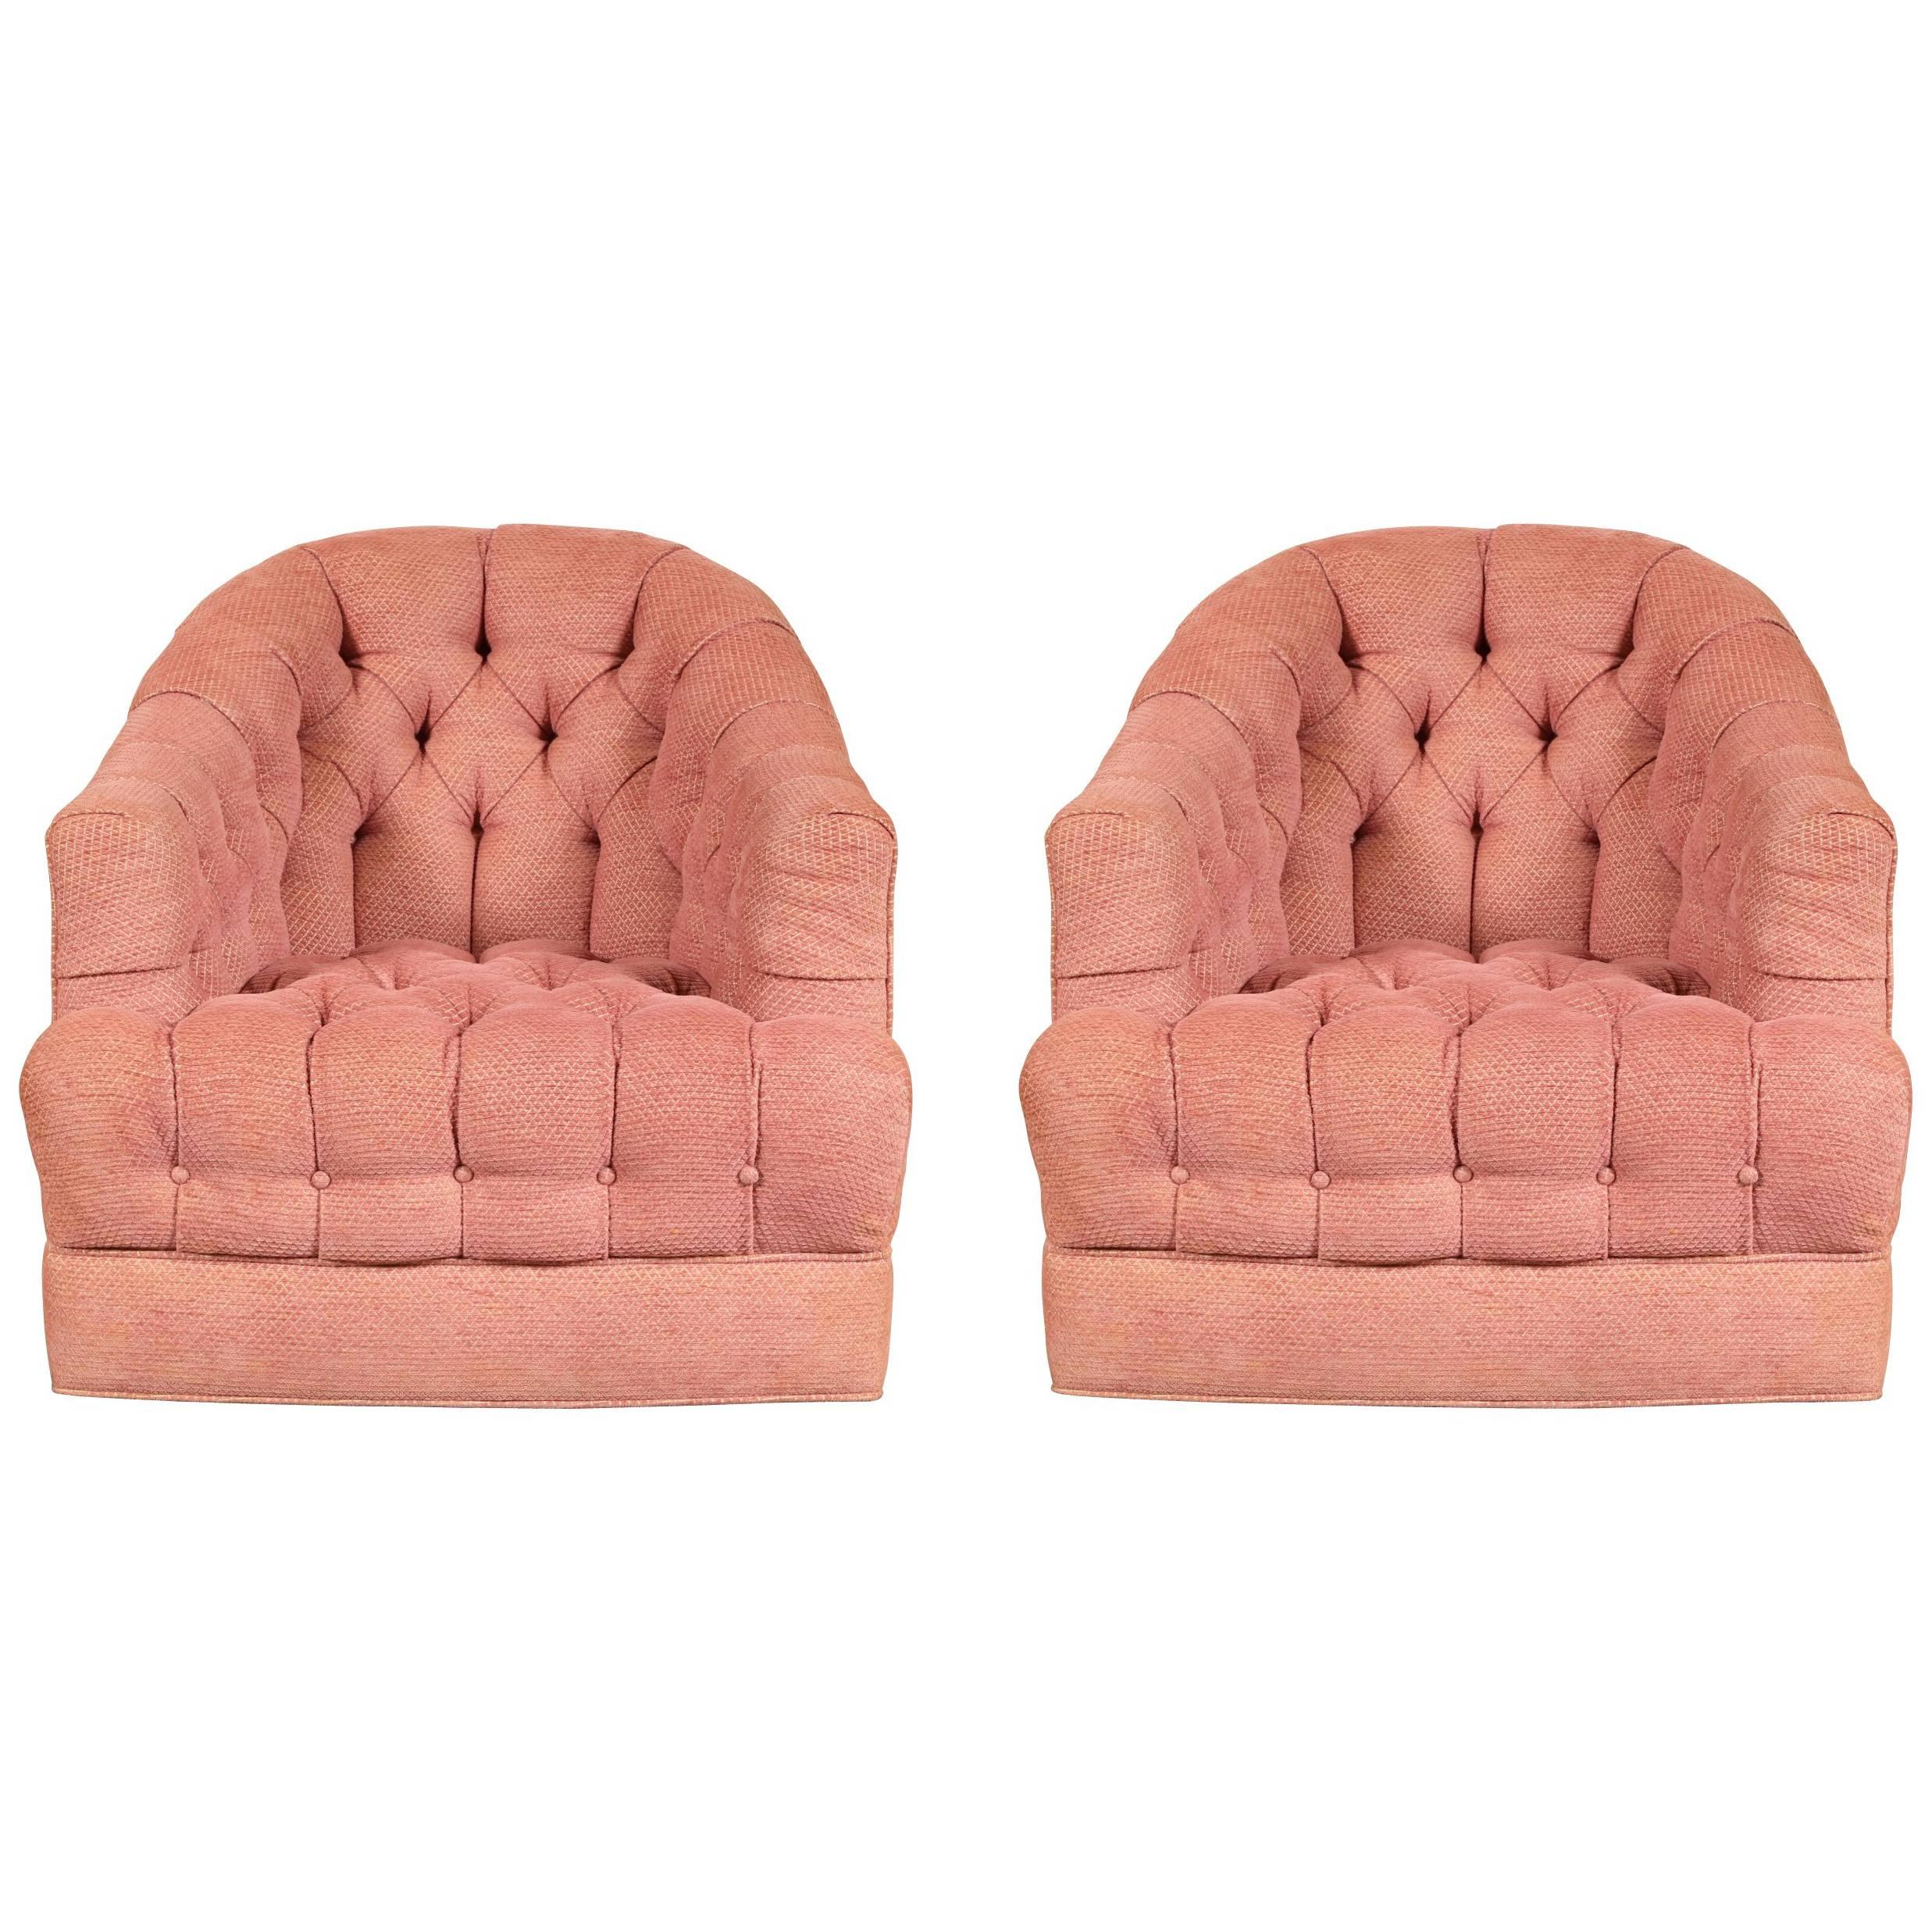 Pair of Pink Upholstered Swivel Club Chairs